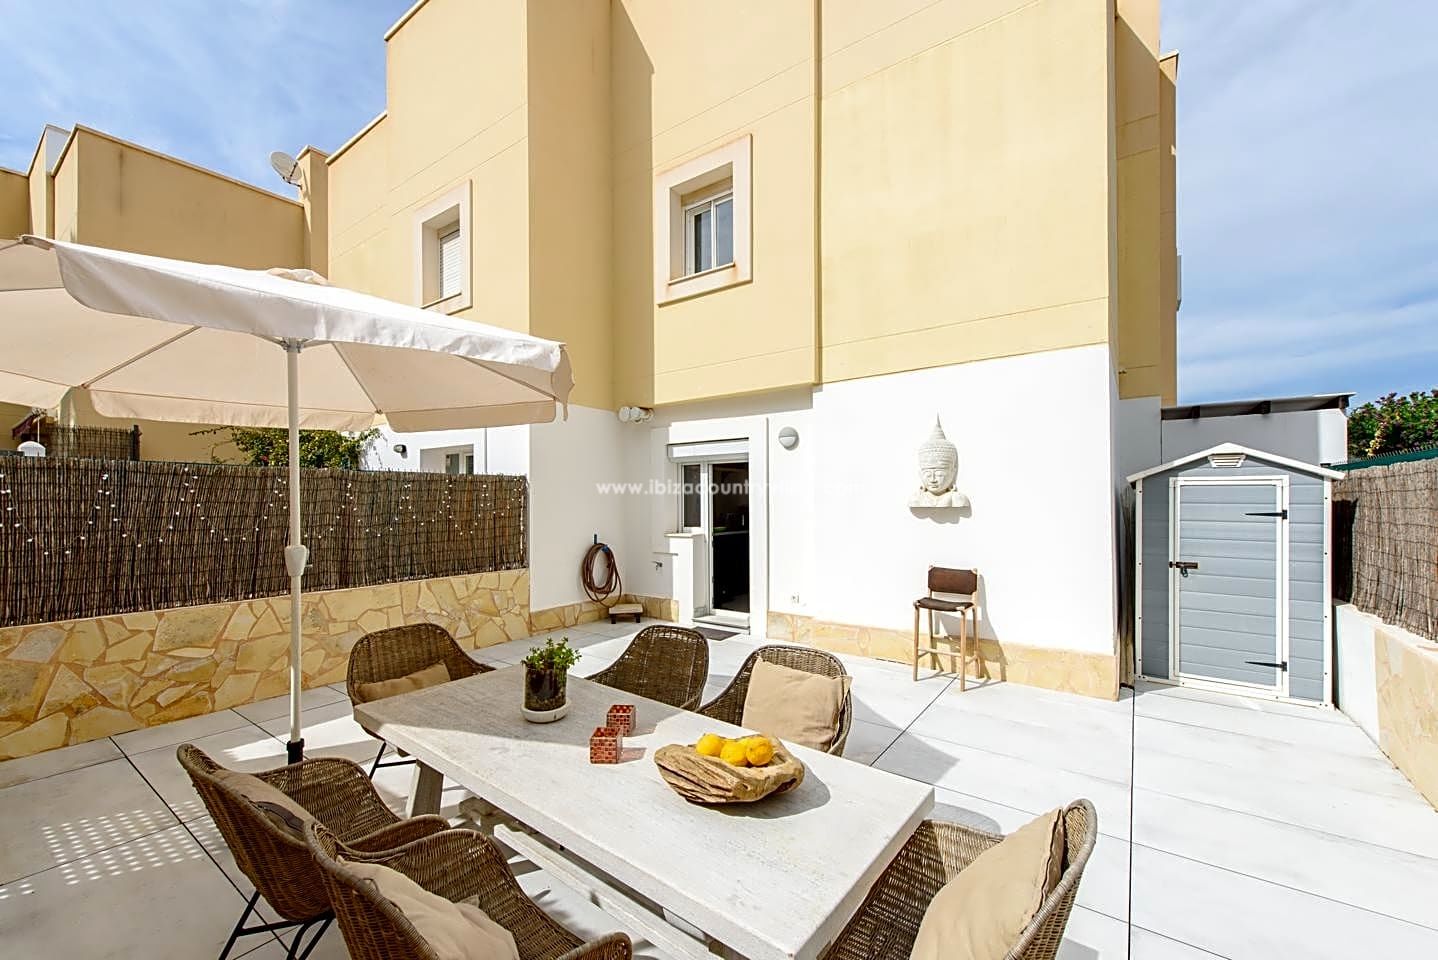 Bright newly refurbished townhouse in Cala Vadella